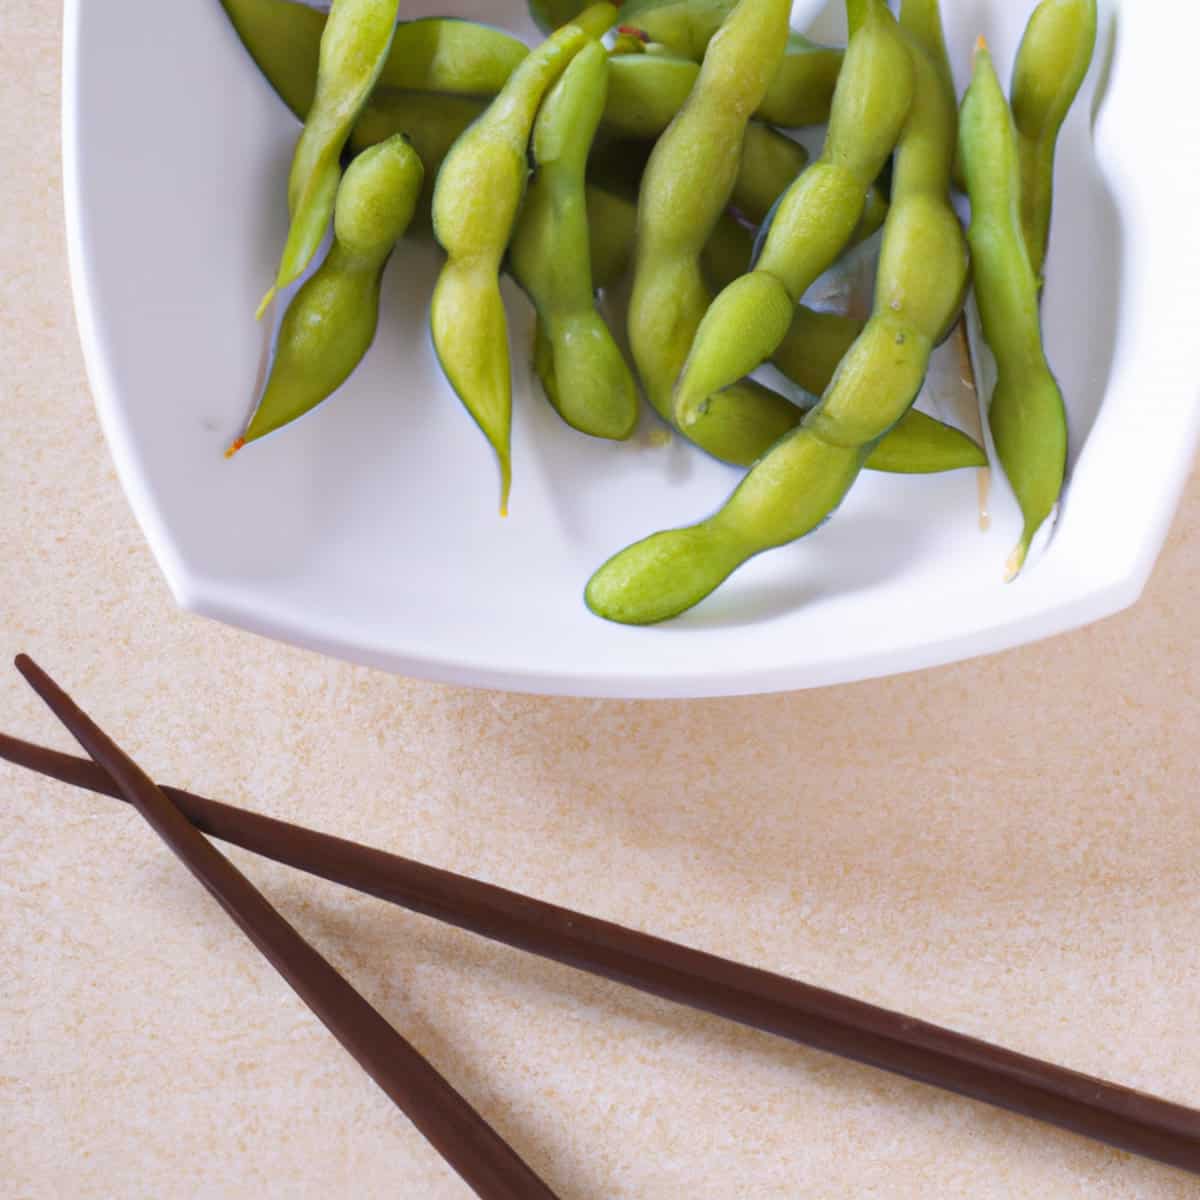 Edamame: What Is This Bean? History, Benefits, Cooking Tips